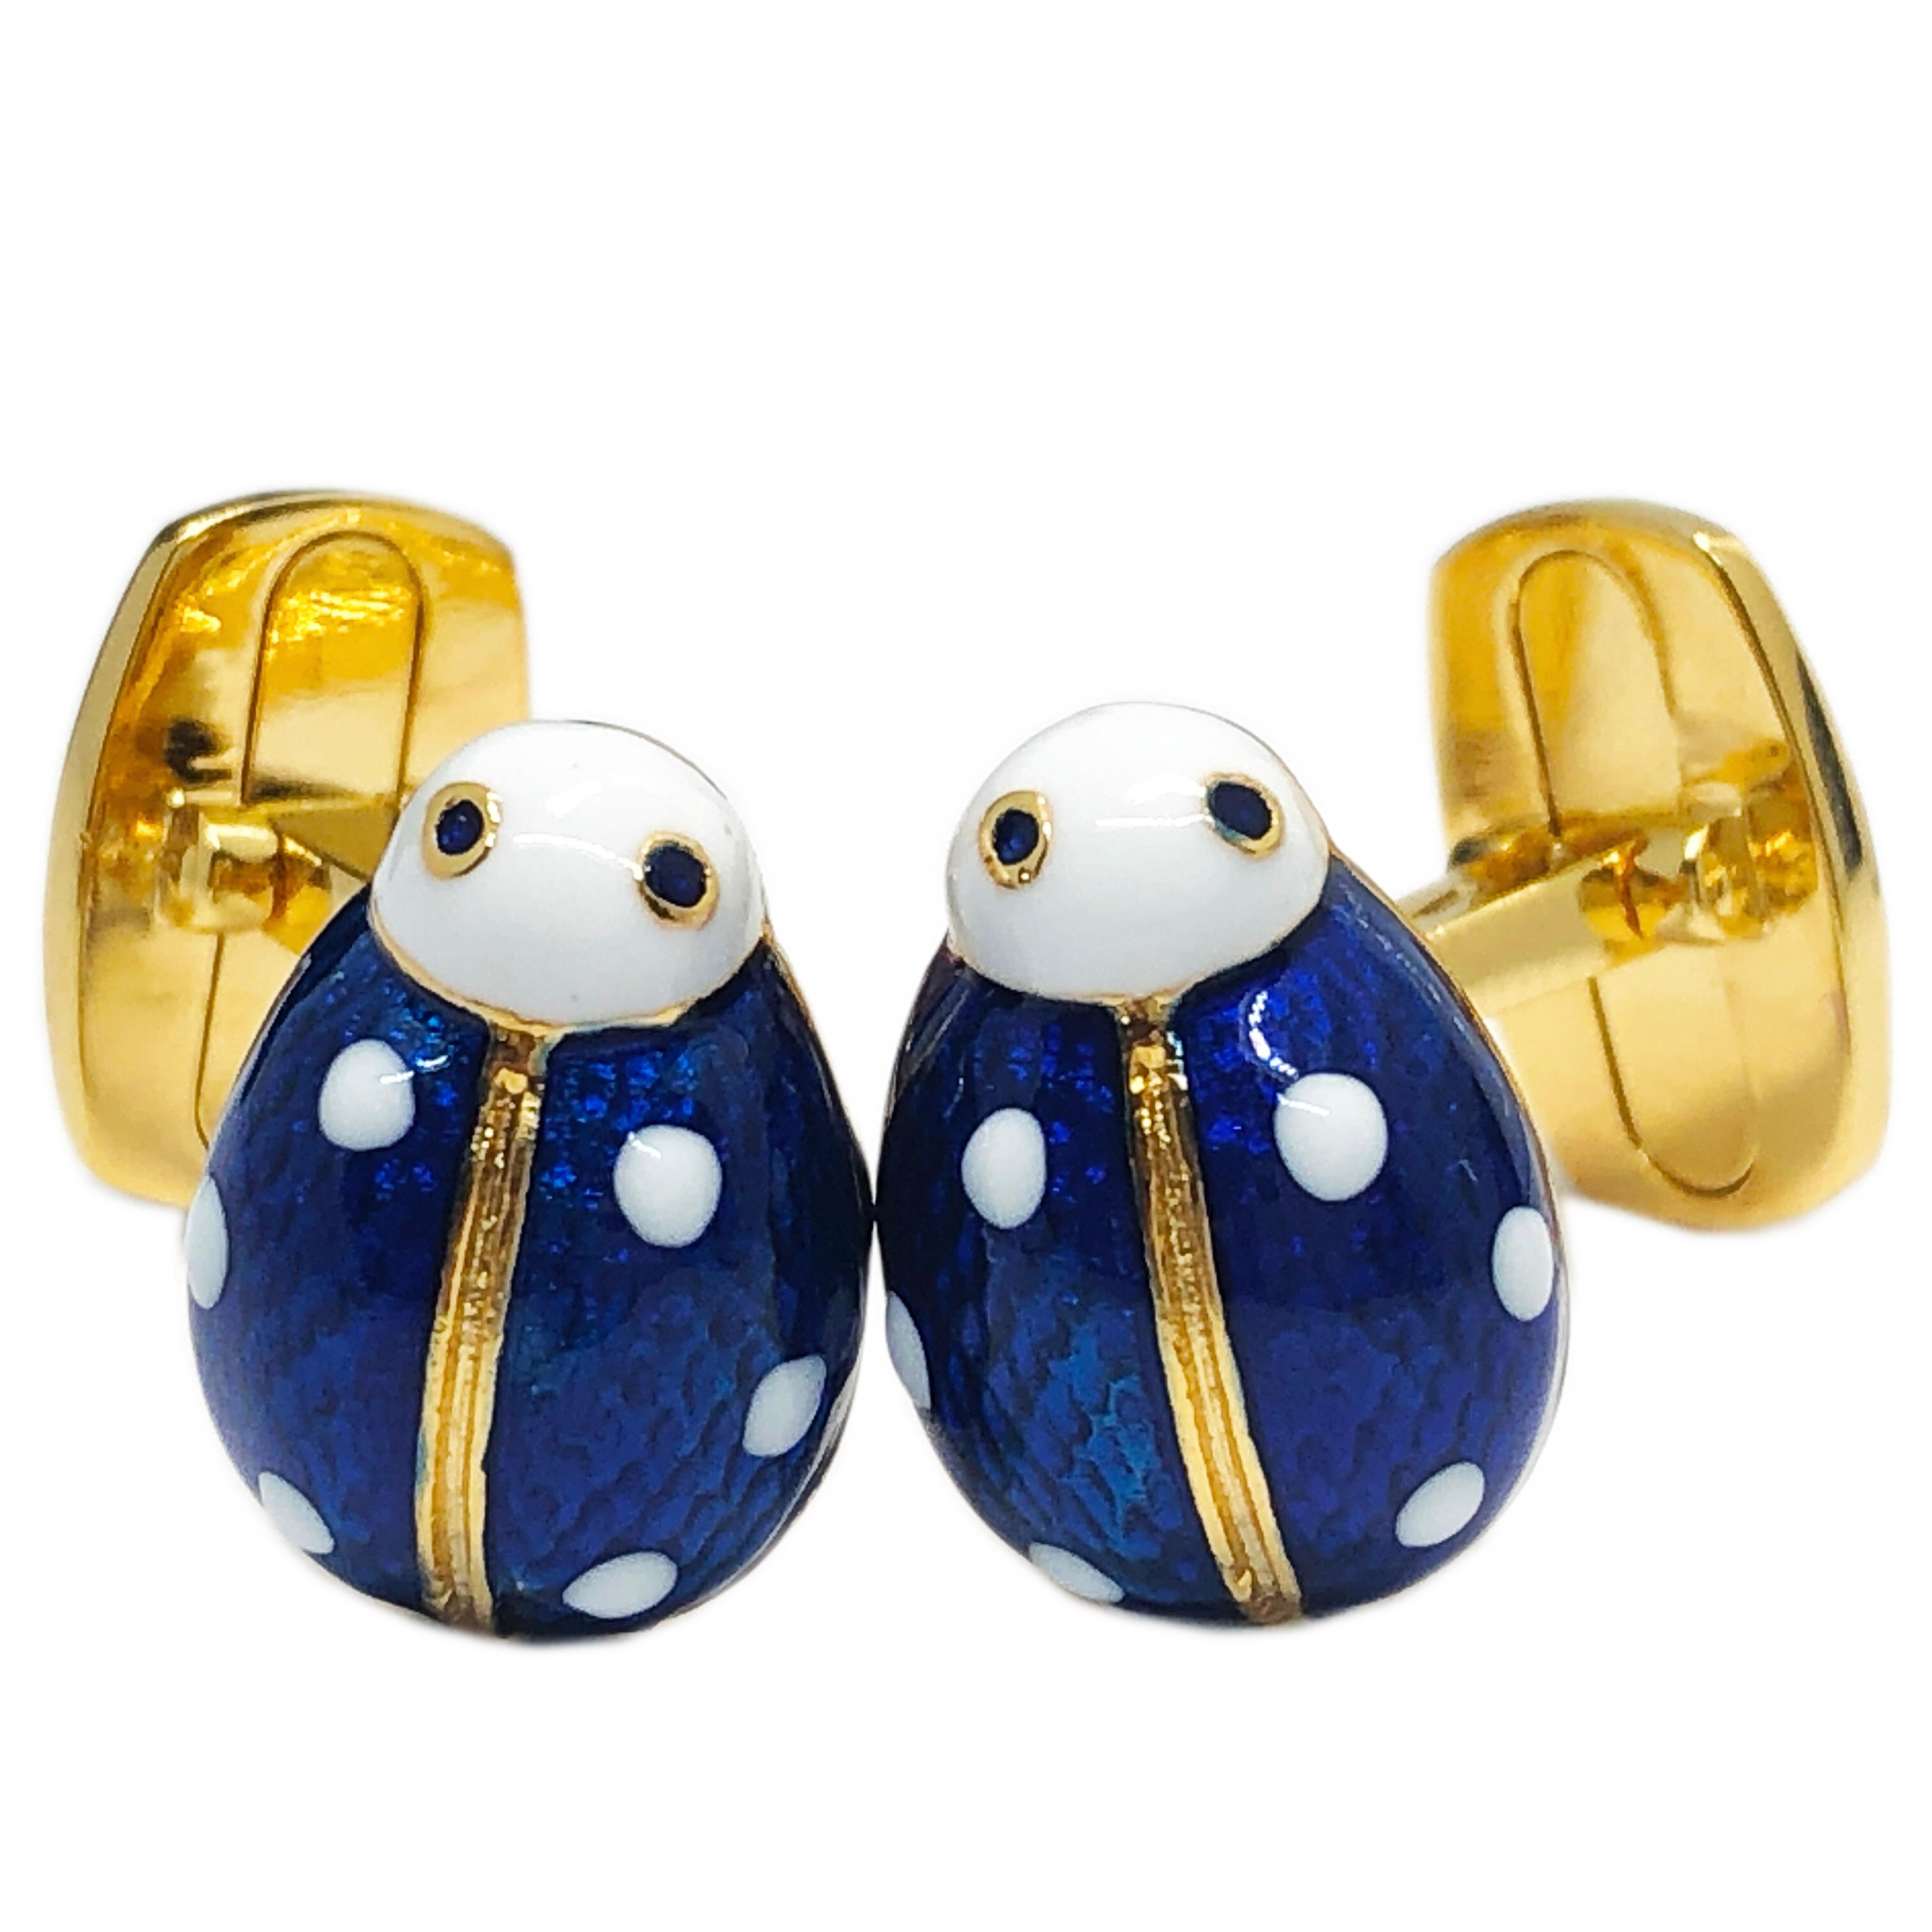 Chic White and Blue Hand Enameled Little Ladybug Shaped T-Bar Back, Sterling Silver Gold Plated Cufflinks.
In our smart Black Box and Pouch.


